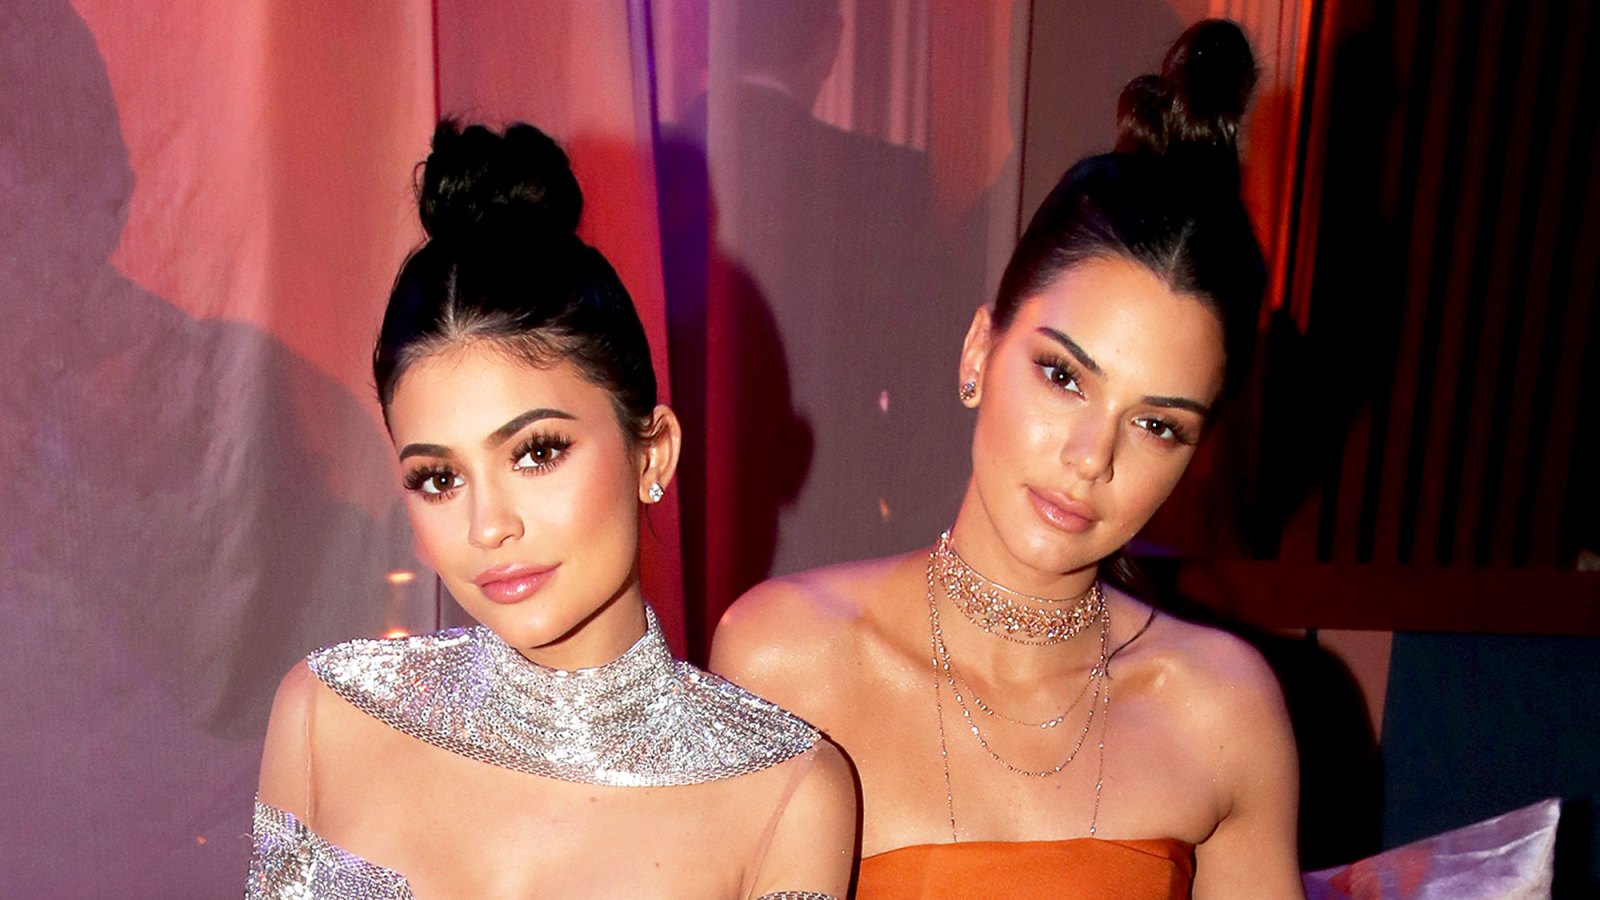 Kylie Jenner and Kendall Jenner attends the 2017 Golden Globes After Party sponsored by Chrysler held at the Beverly Hilton Hotel in Beverly Hills, California.